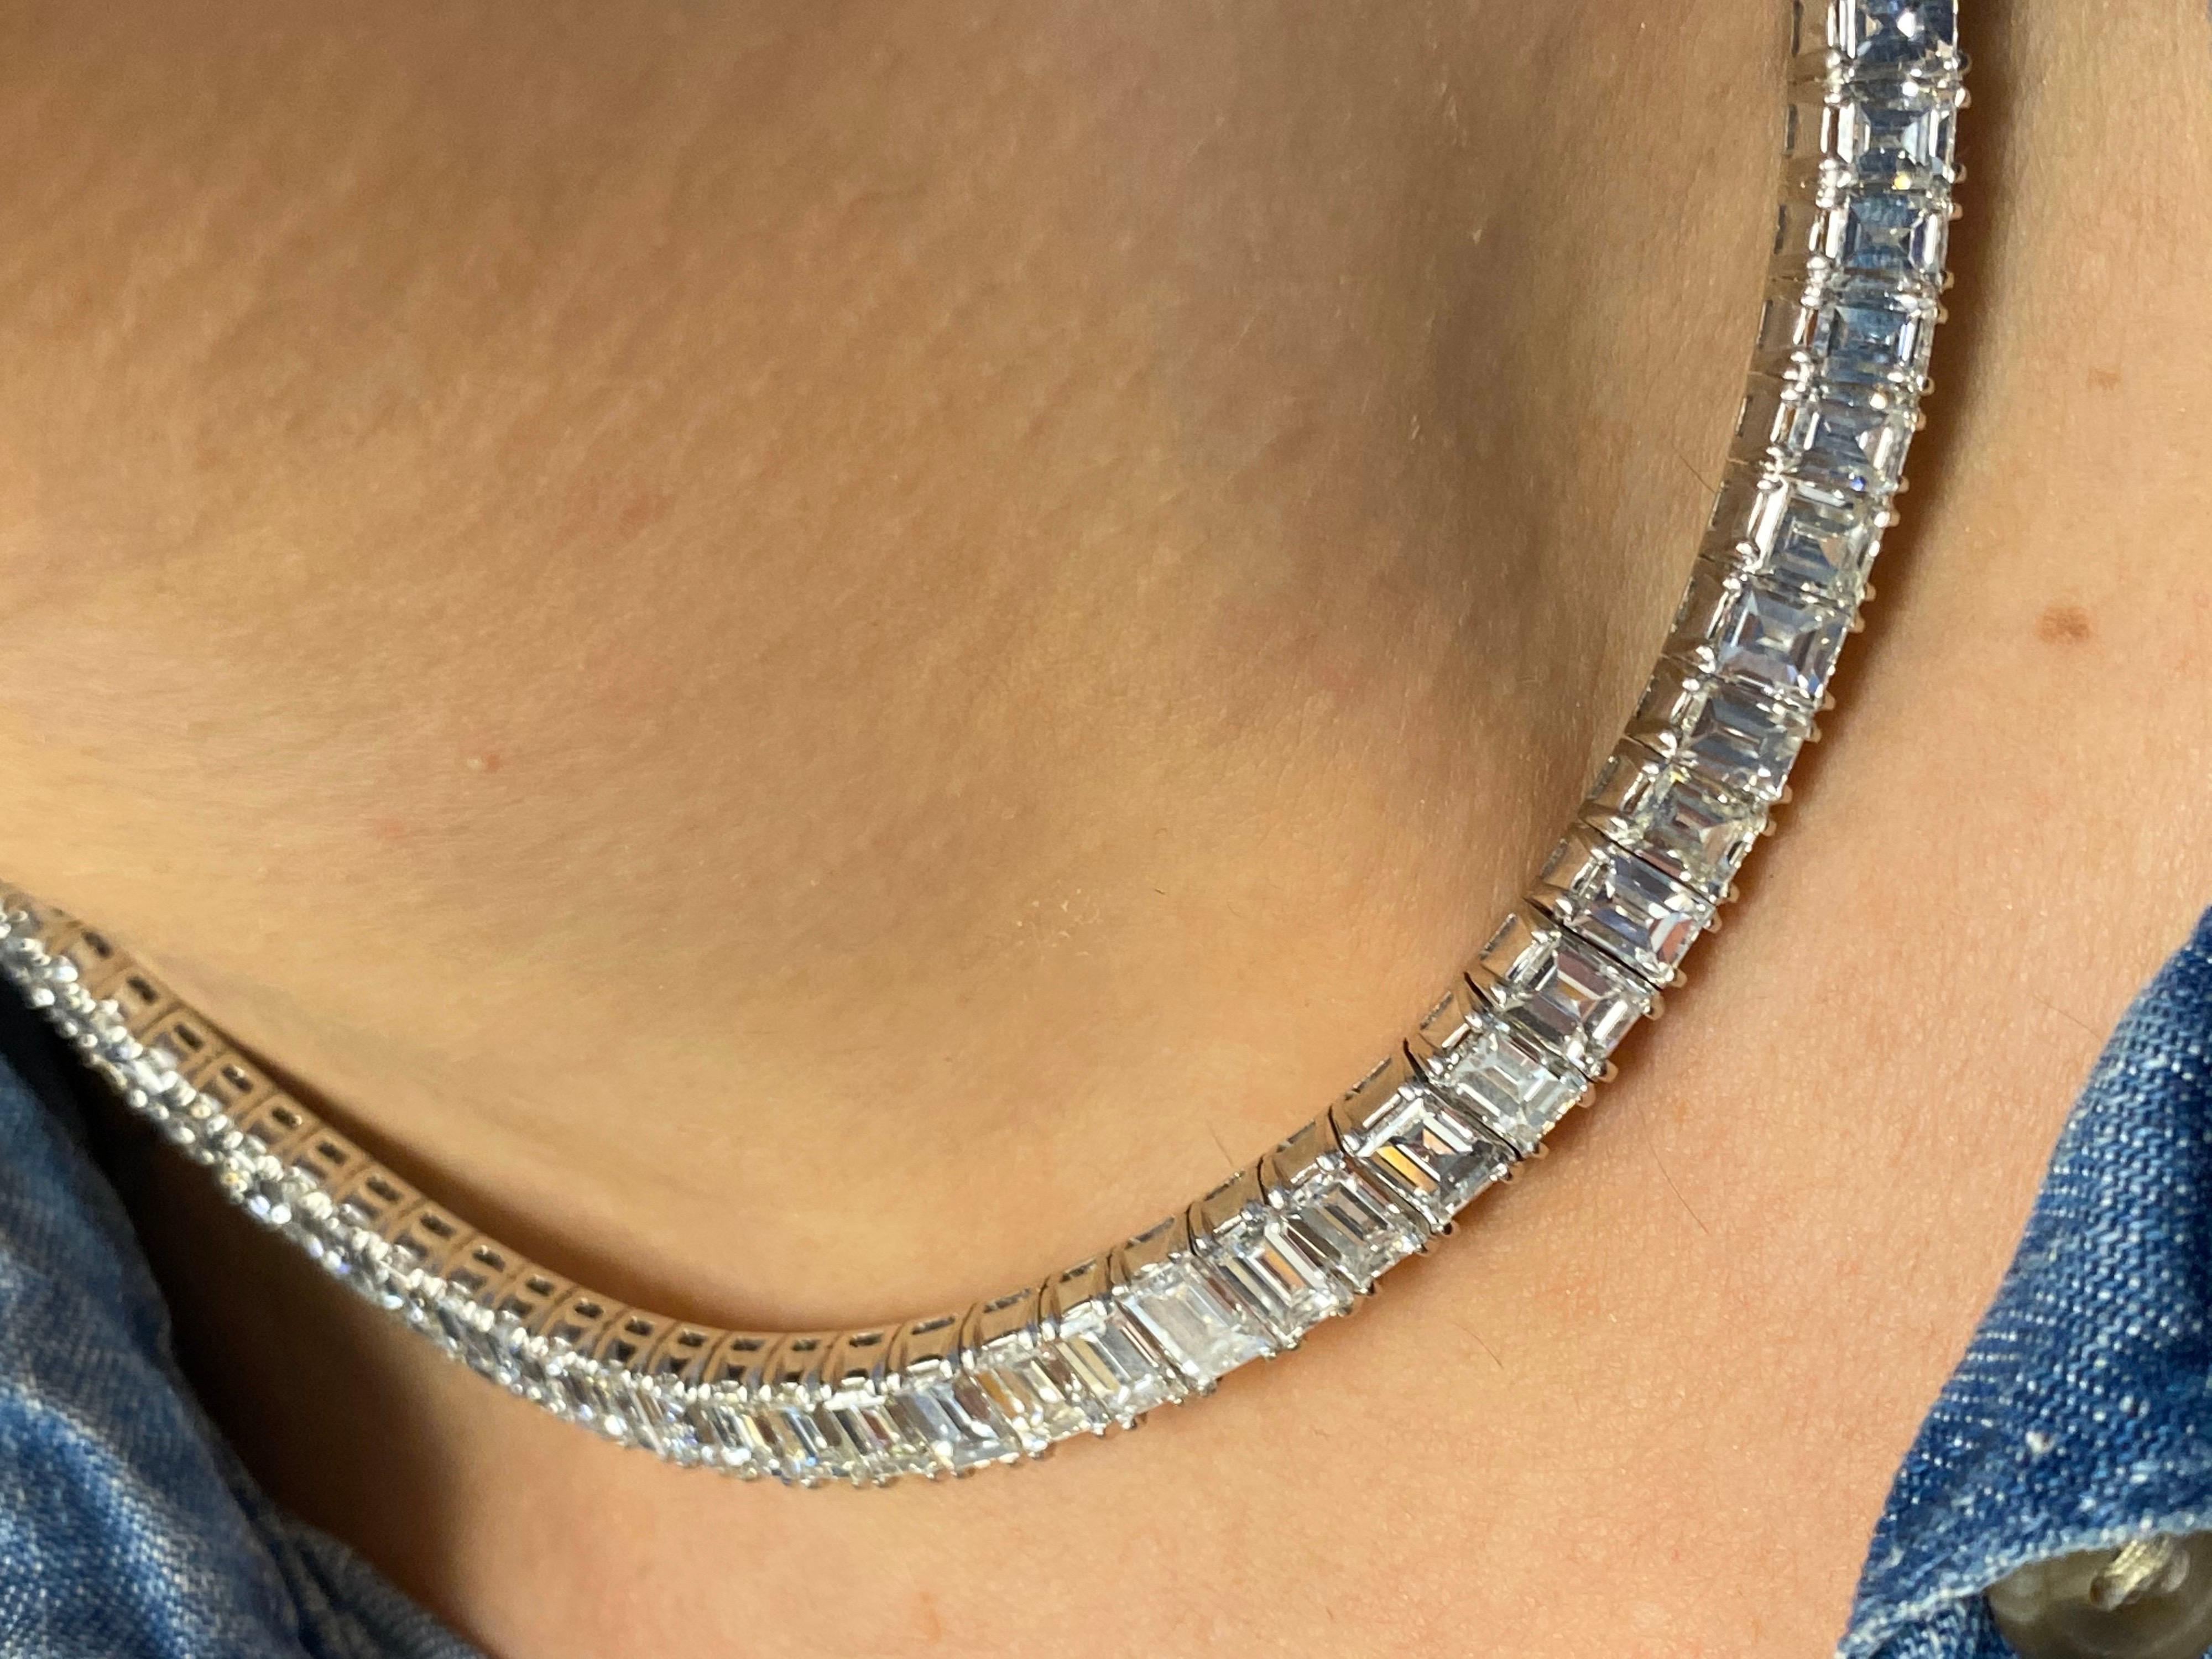 Dress up your denim.
107 EFG VS  beautifully matched emerald cut diamonds ,come together to form a sophisticated and elegant stream of beauty .
Handcrafted in platnium at a precise angle ensuring a lovely fit .
57 Total carat weight.
 